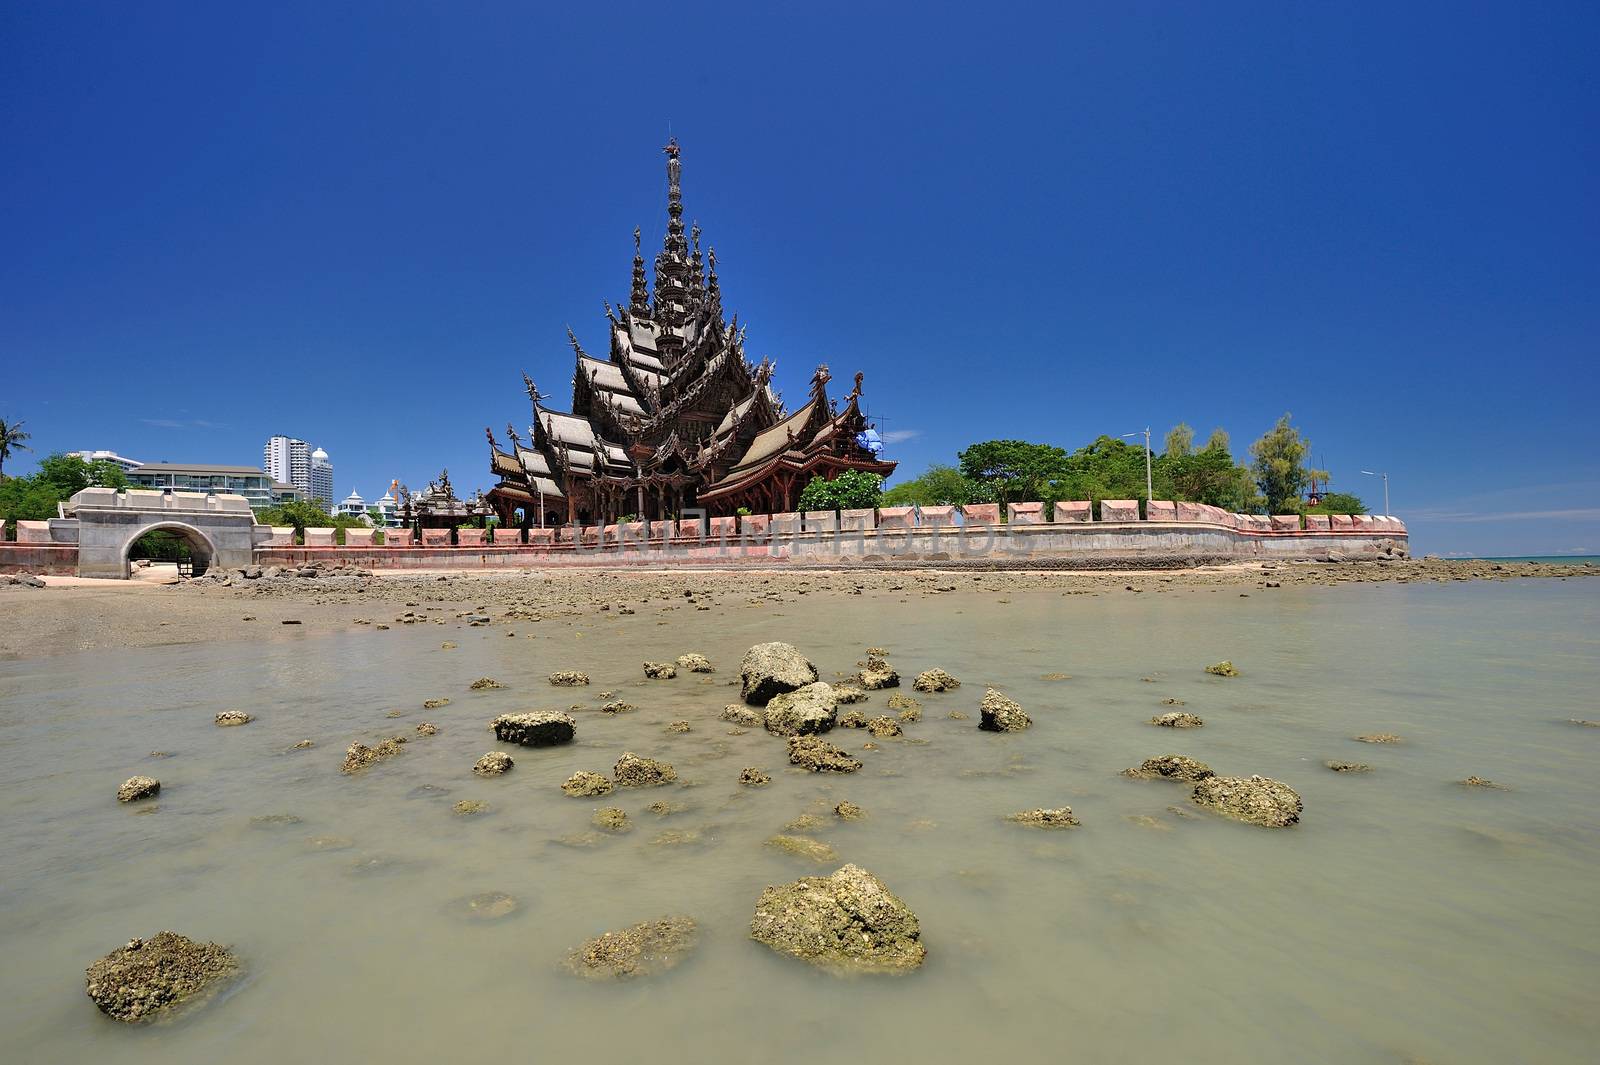 sanctuary of truth in Chonburi thailand by think4photop